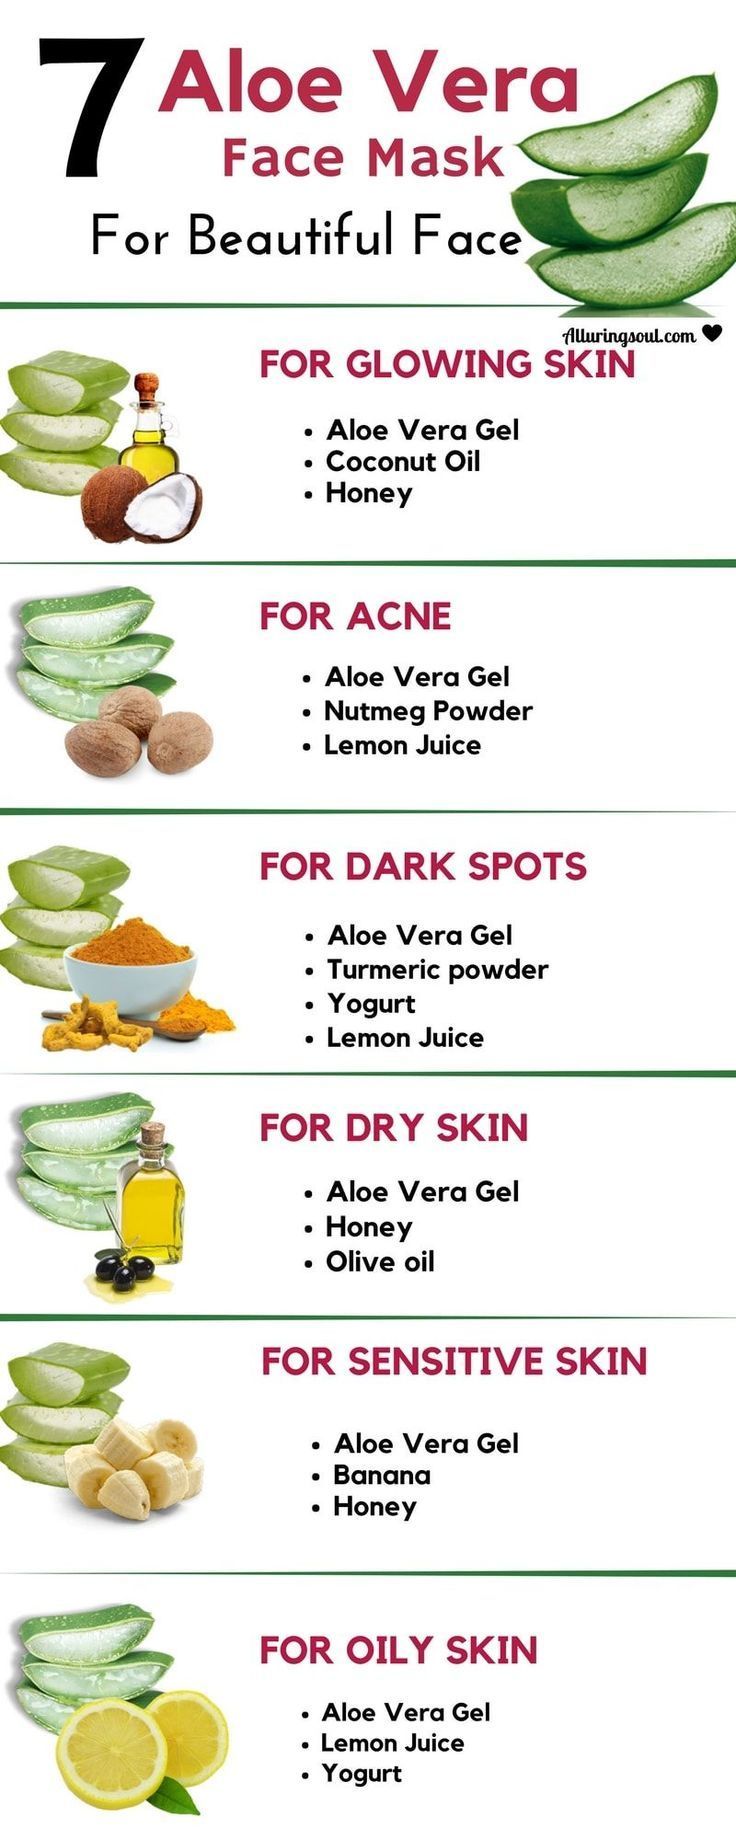 7 Aloe Vera Face Mask For Bright And Beautiful Skin | Alluring Soul -   21 beauty Skin diy ideas